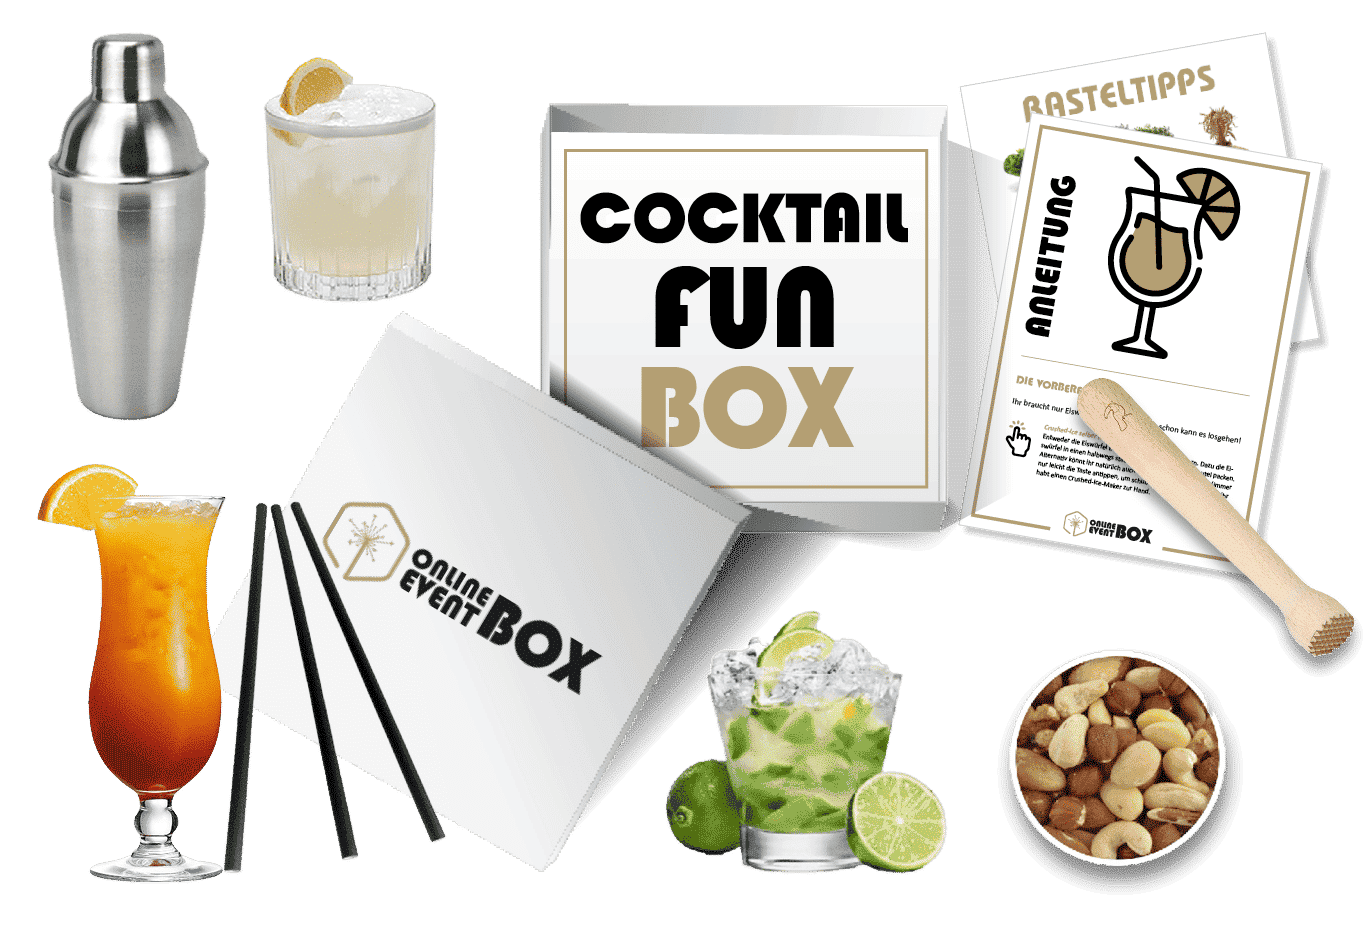 Corporate events with Cocktail Fun Box